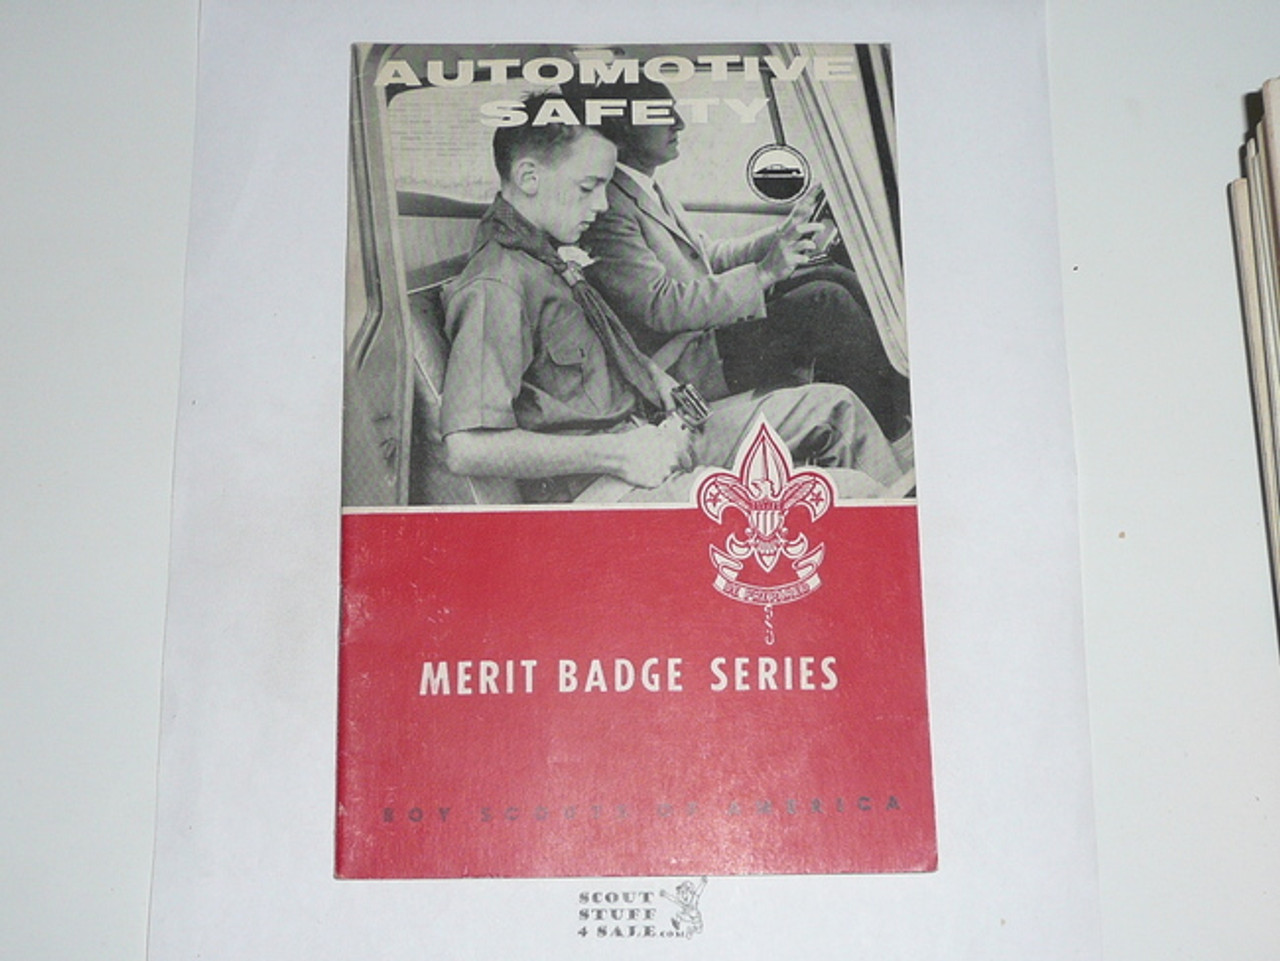 Automotive Safety Merit Badge Pamphlet, Type 6, Picture Top Red Bottom Cover, 10-62 Printing